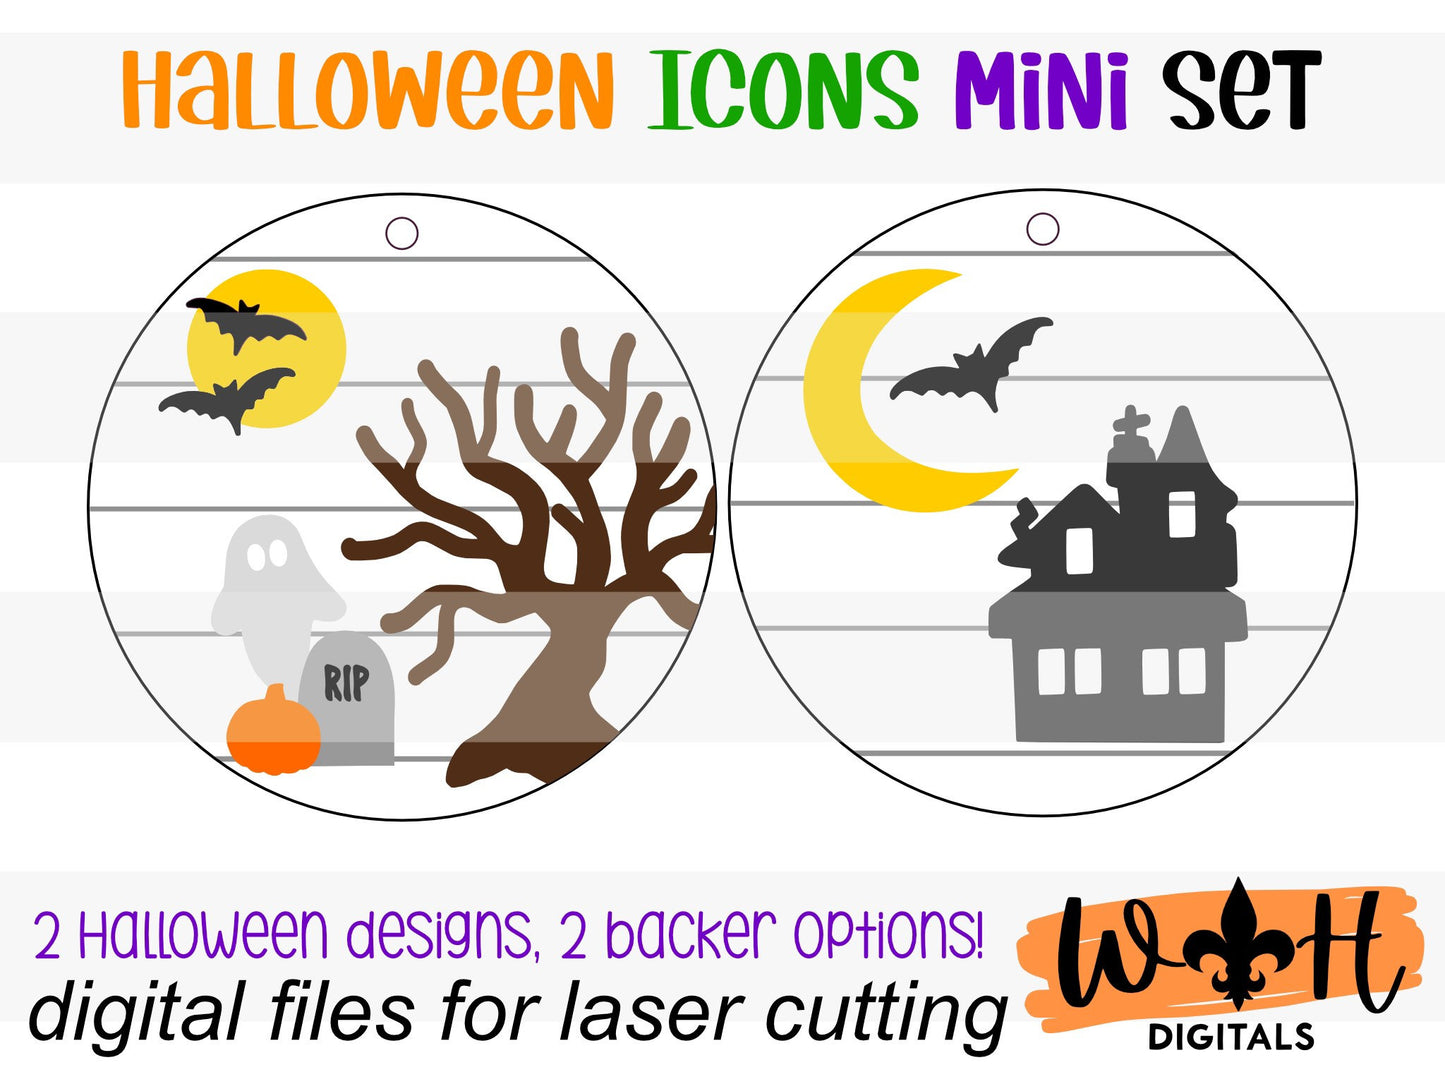 Halloween Icons Haunted House and Graveyard Mini Set - Spooky Handdrawn DIY Doodle Ornaments - Cut File For Glowforge - Digital SVG File